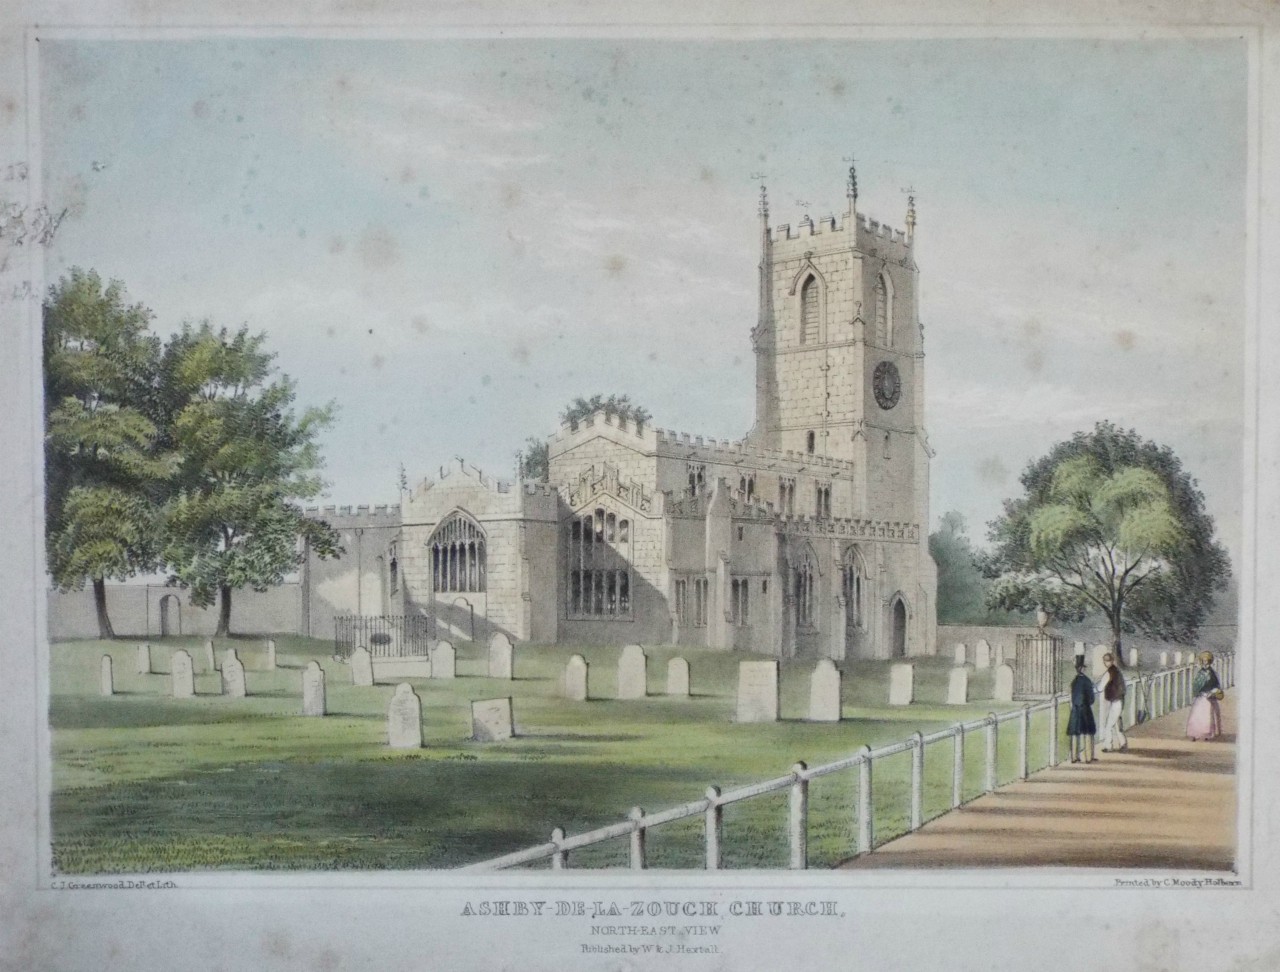 Lithograph - Asby-de-la-Zouch Church, North-East View. - Greenwood